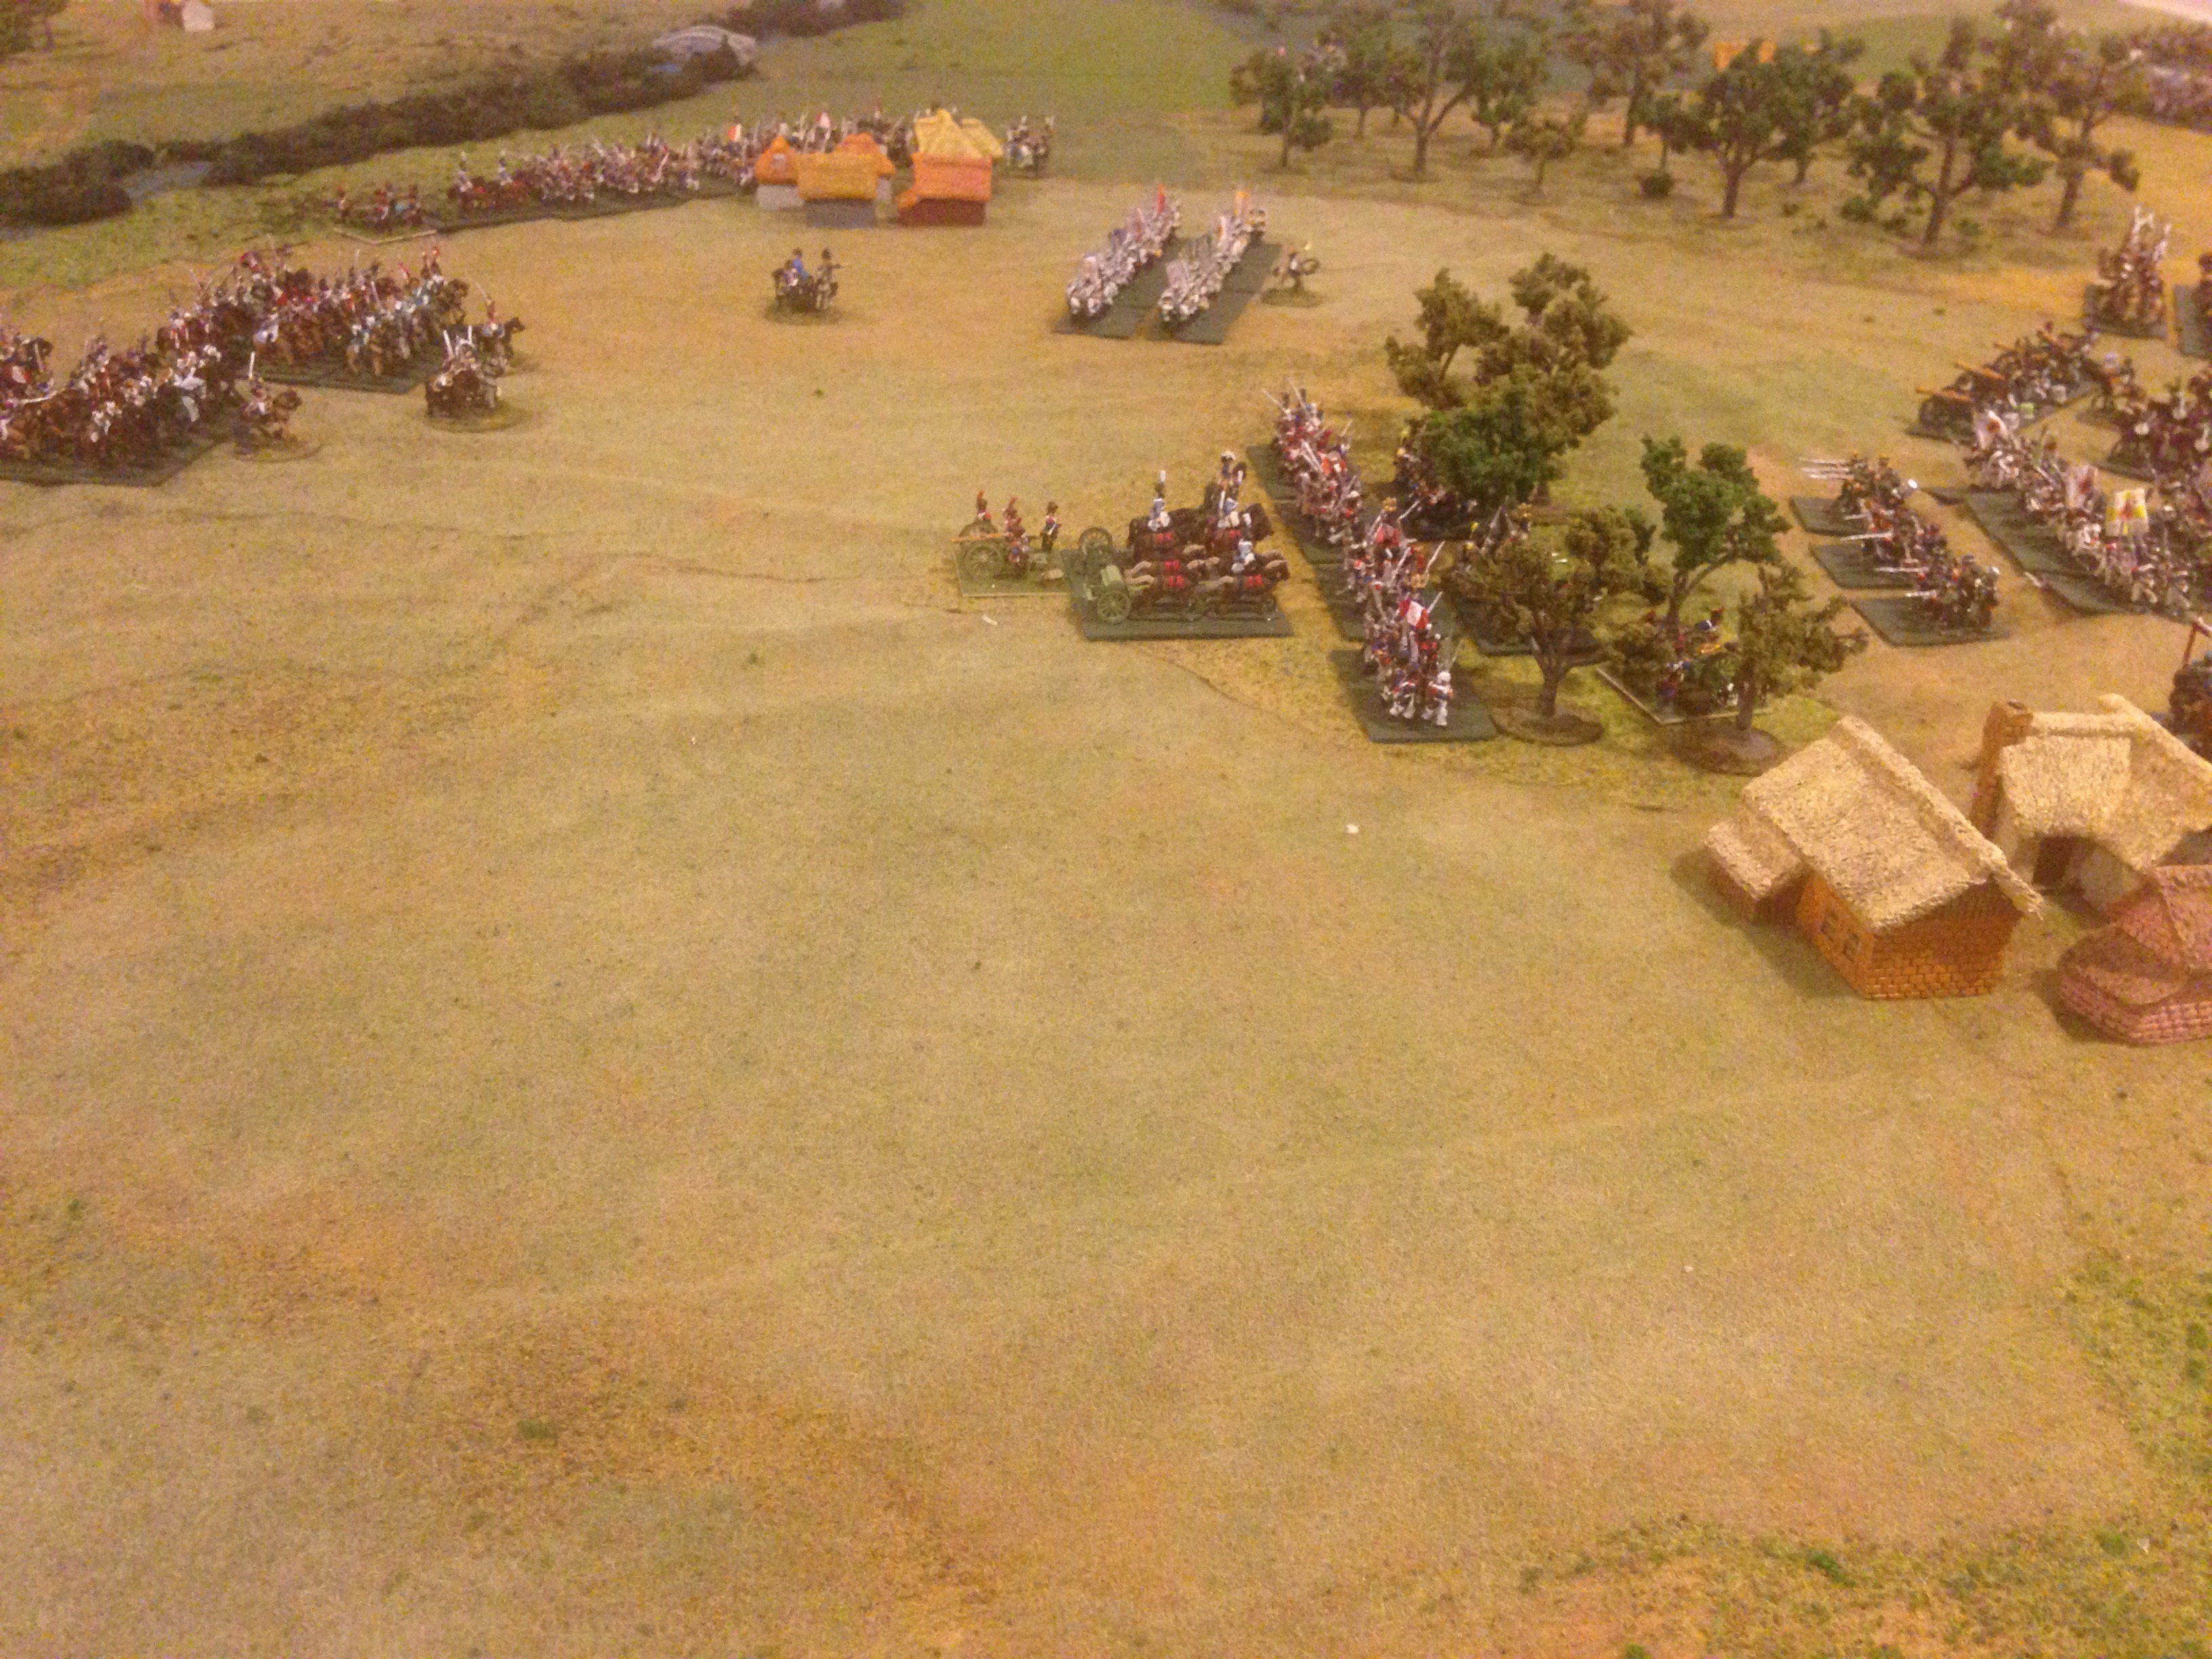 Opposing forces on the Allied left, French and Saxons infantry forming to oppose the deep Russian deployment.